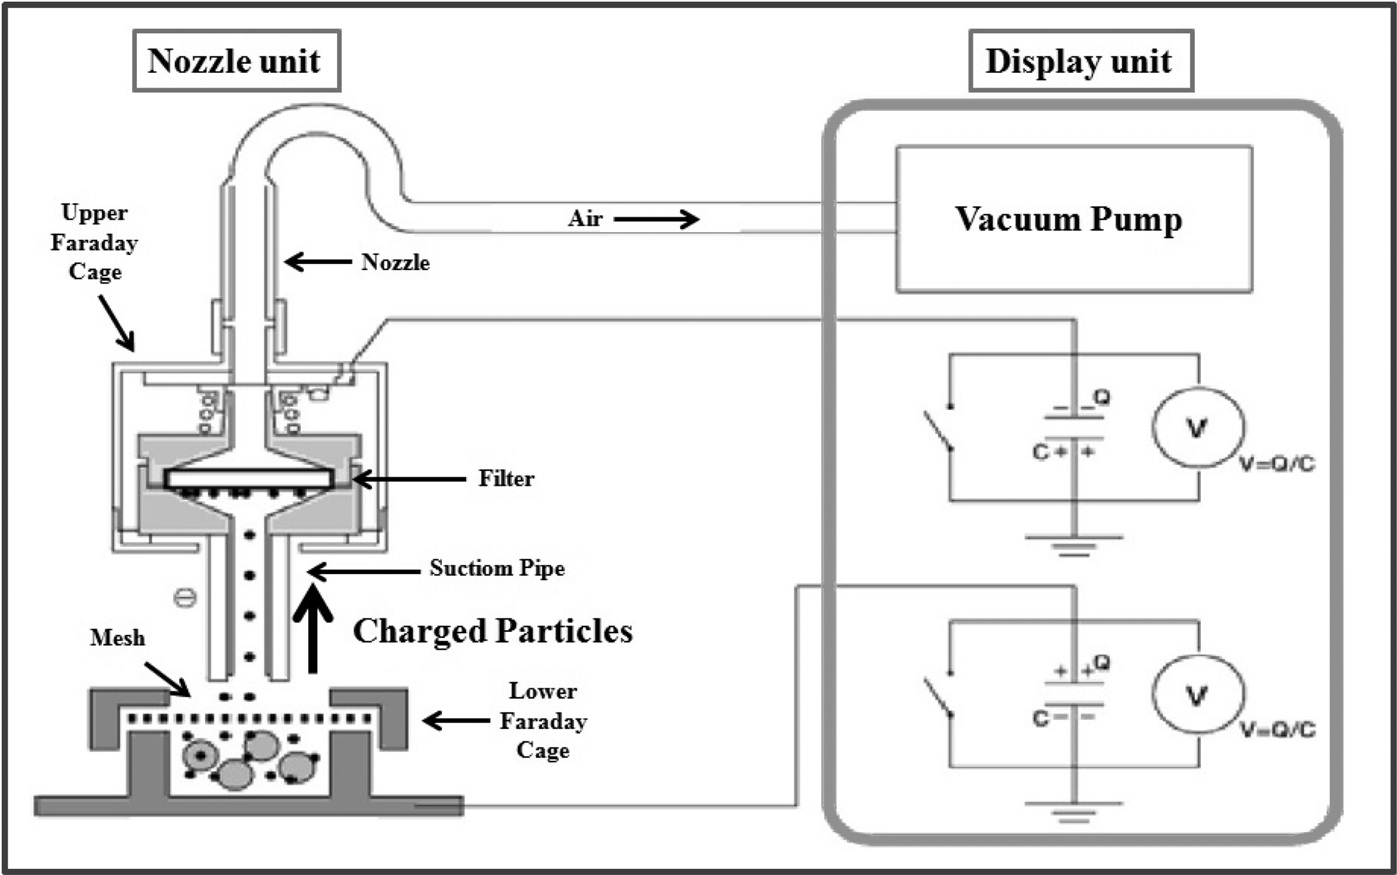 Schematic diagram of draw-in type instrument for measuring particle charge.